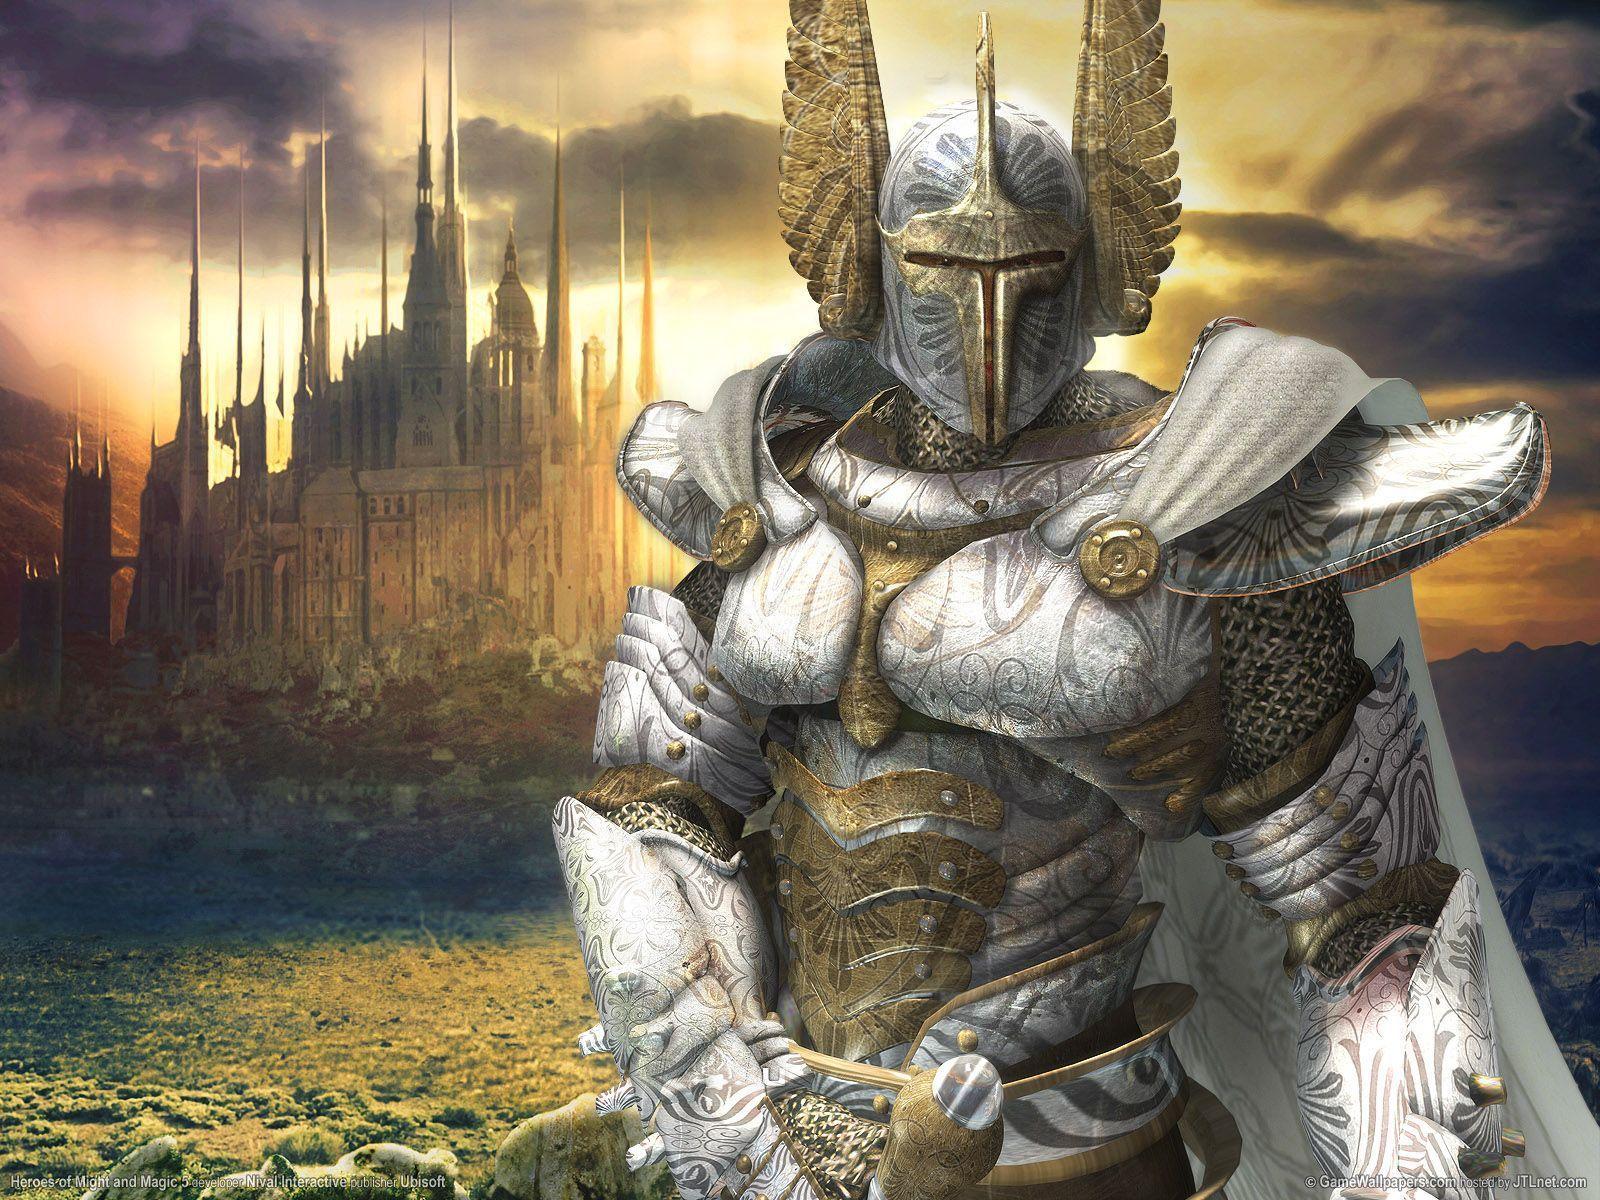 Heroes of Might & Magic 5 wallpaper. Heroes of Might & Magic 5